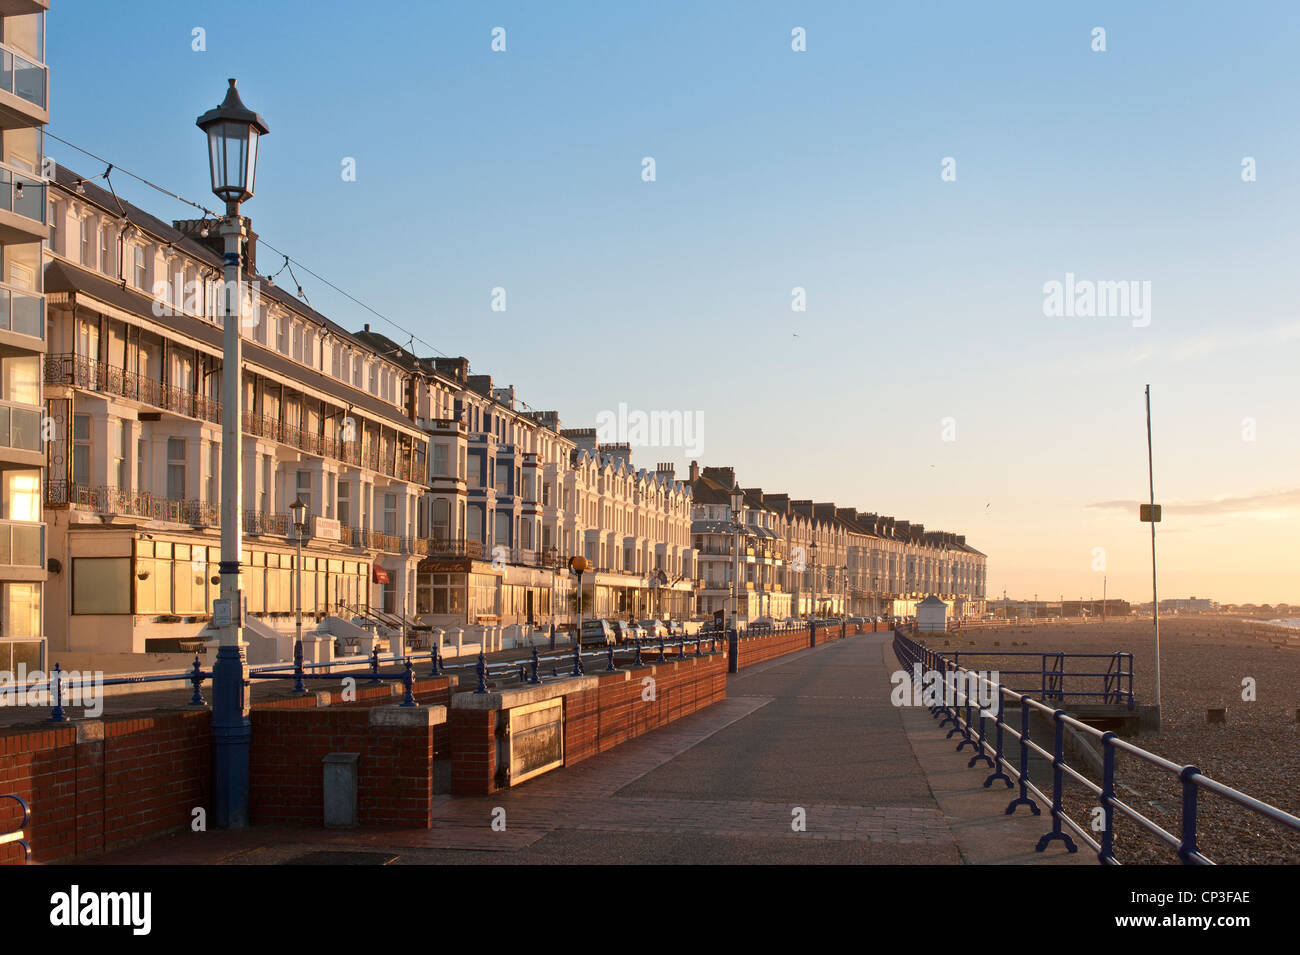 EASTBOURNE, EAST SUSSEX, UK - APRIL 30, 2012:  Sunlight on Seafront Hotels along the Promenade Stock Photo